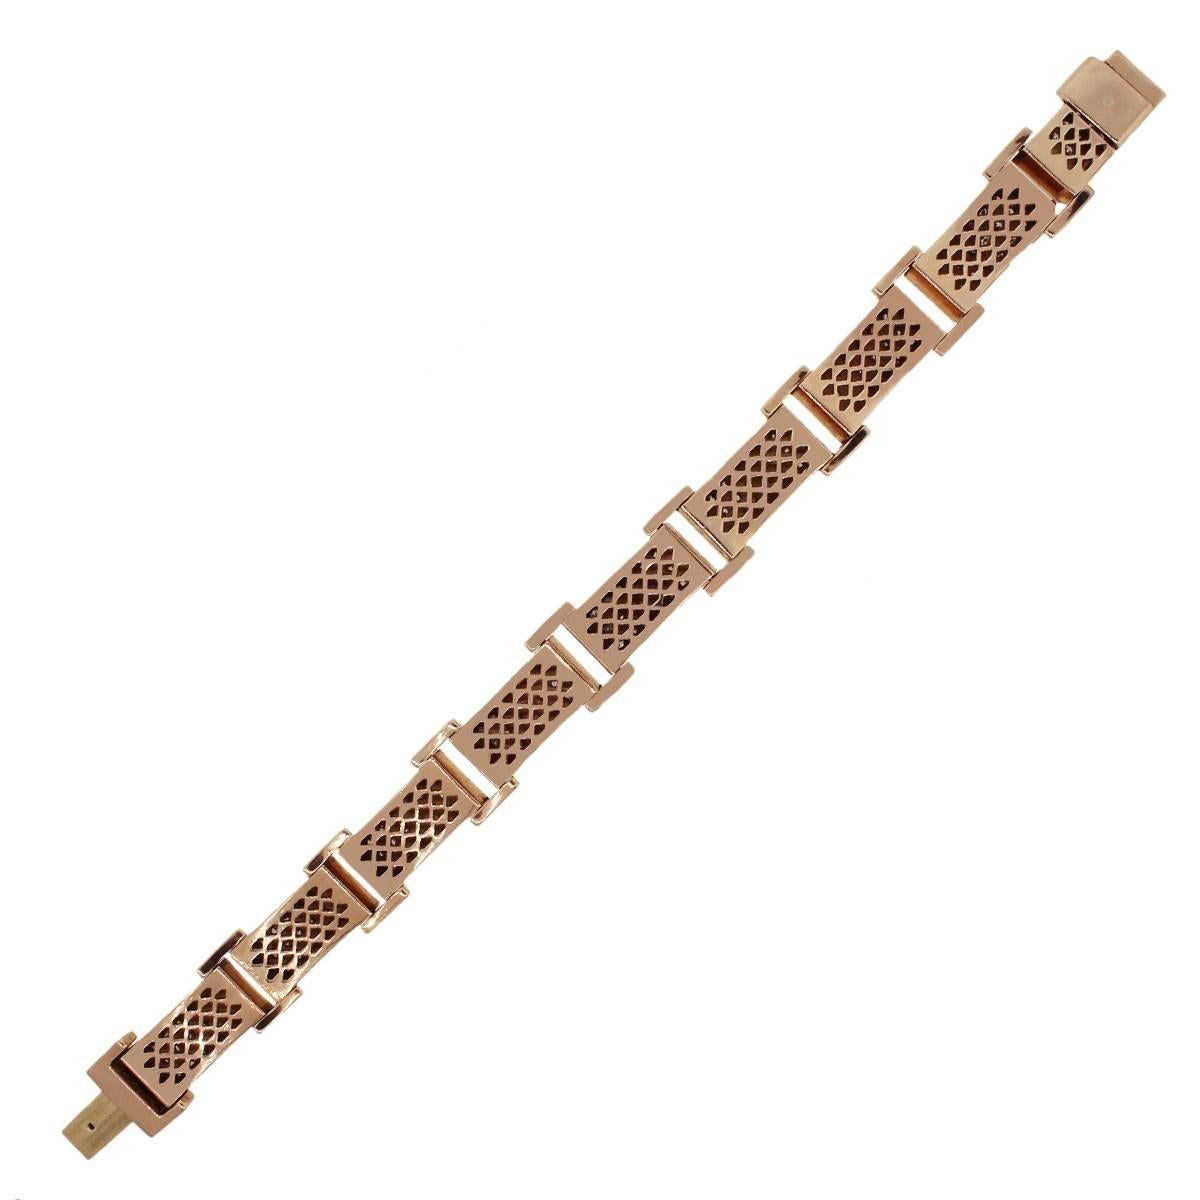 Material: 14k rose gold
Diamond Details: Approximately 20ctw of round brilliant diamonds.
Clasp: Tongue in box clasp
Measurements: 9″ x 0.59″ x 0.20″
Total Weight: 95.2g (61.2dwt)
SKU: A30311354